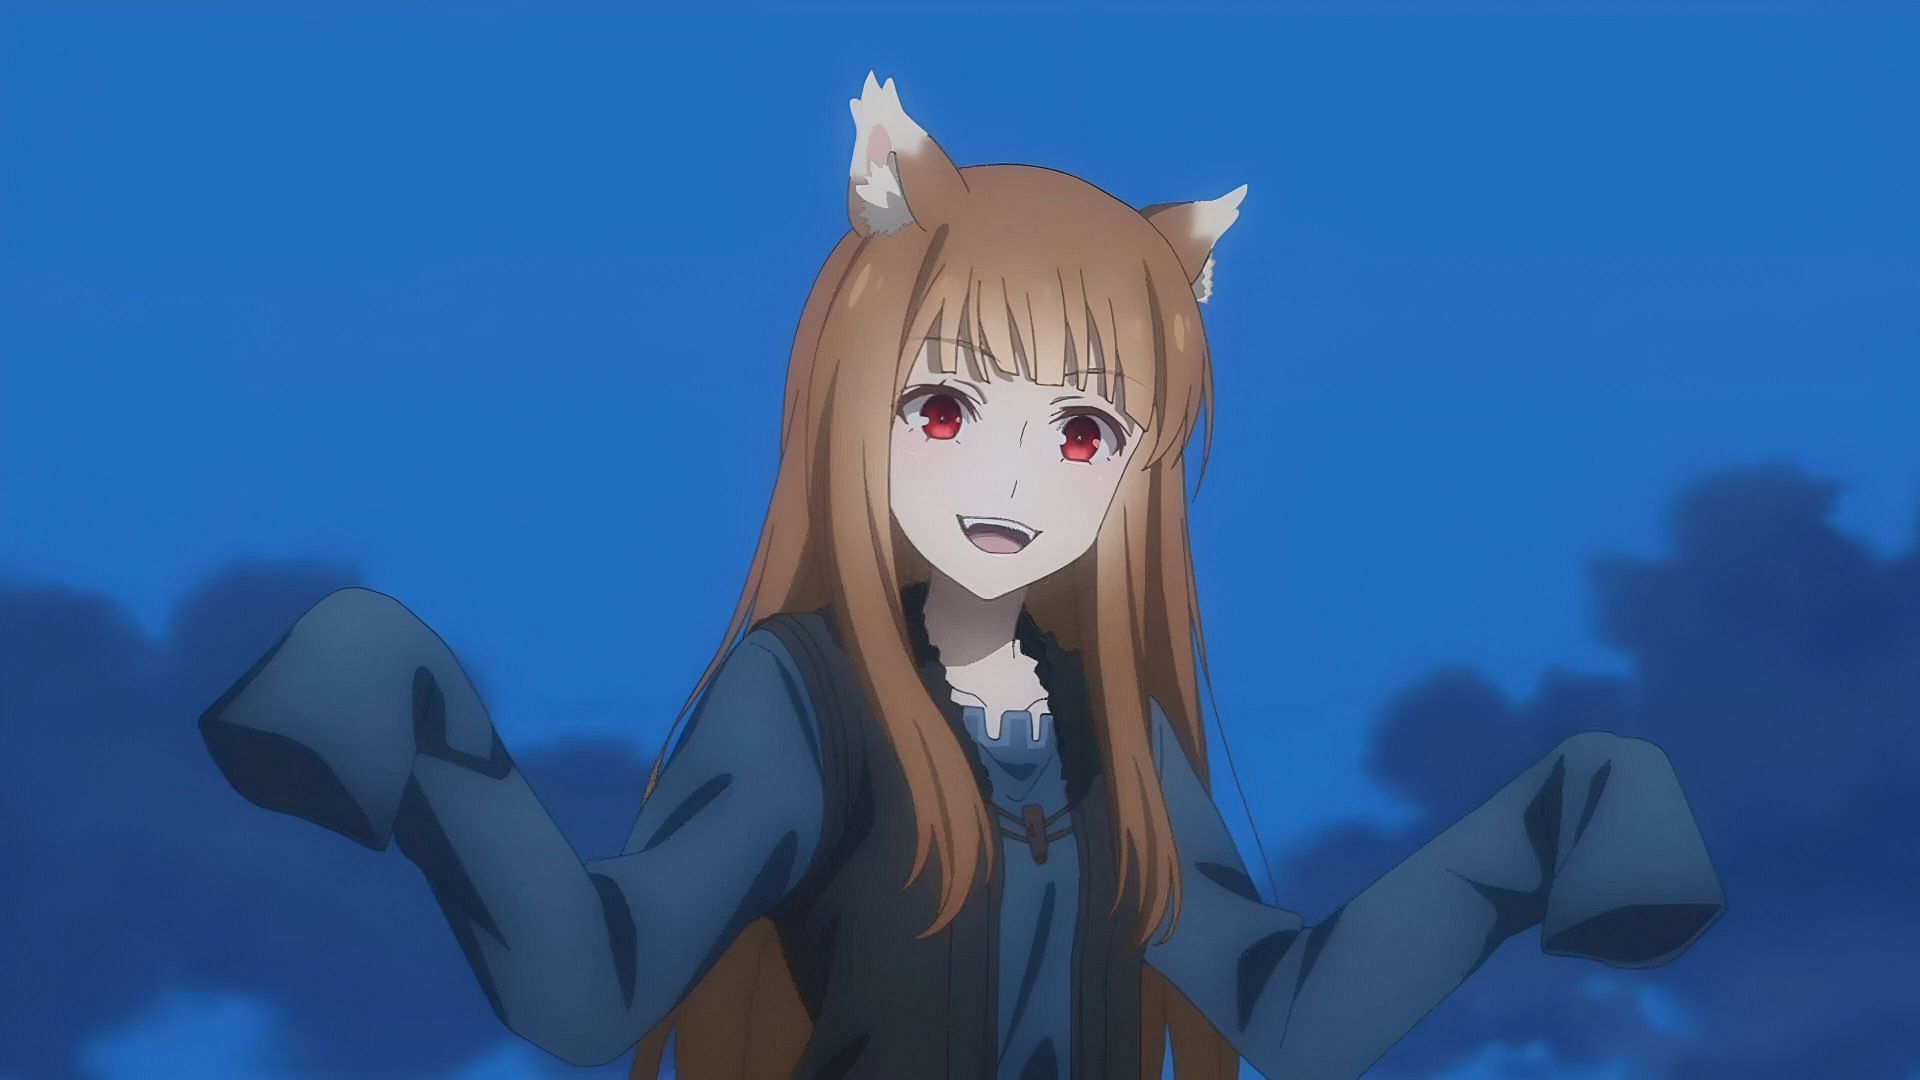 Holo as seen in the anime (Image via Passione)